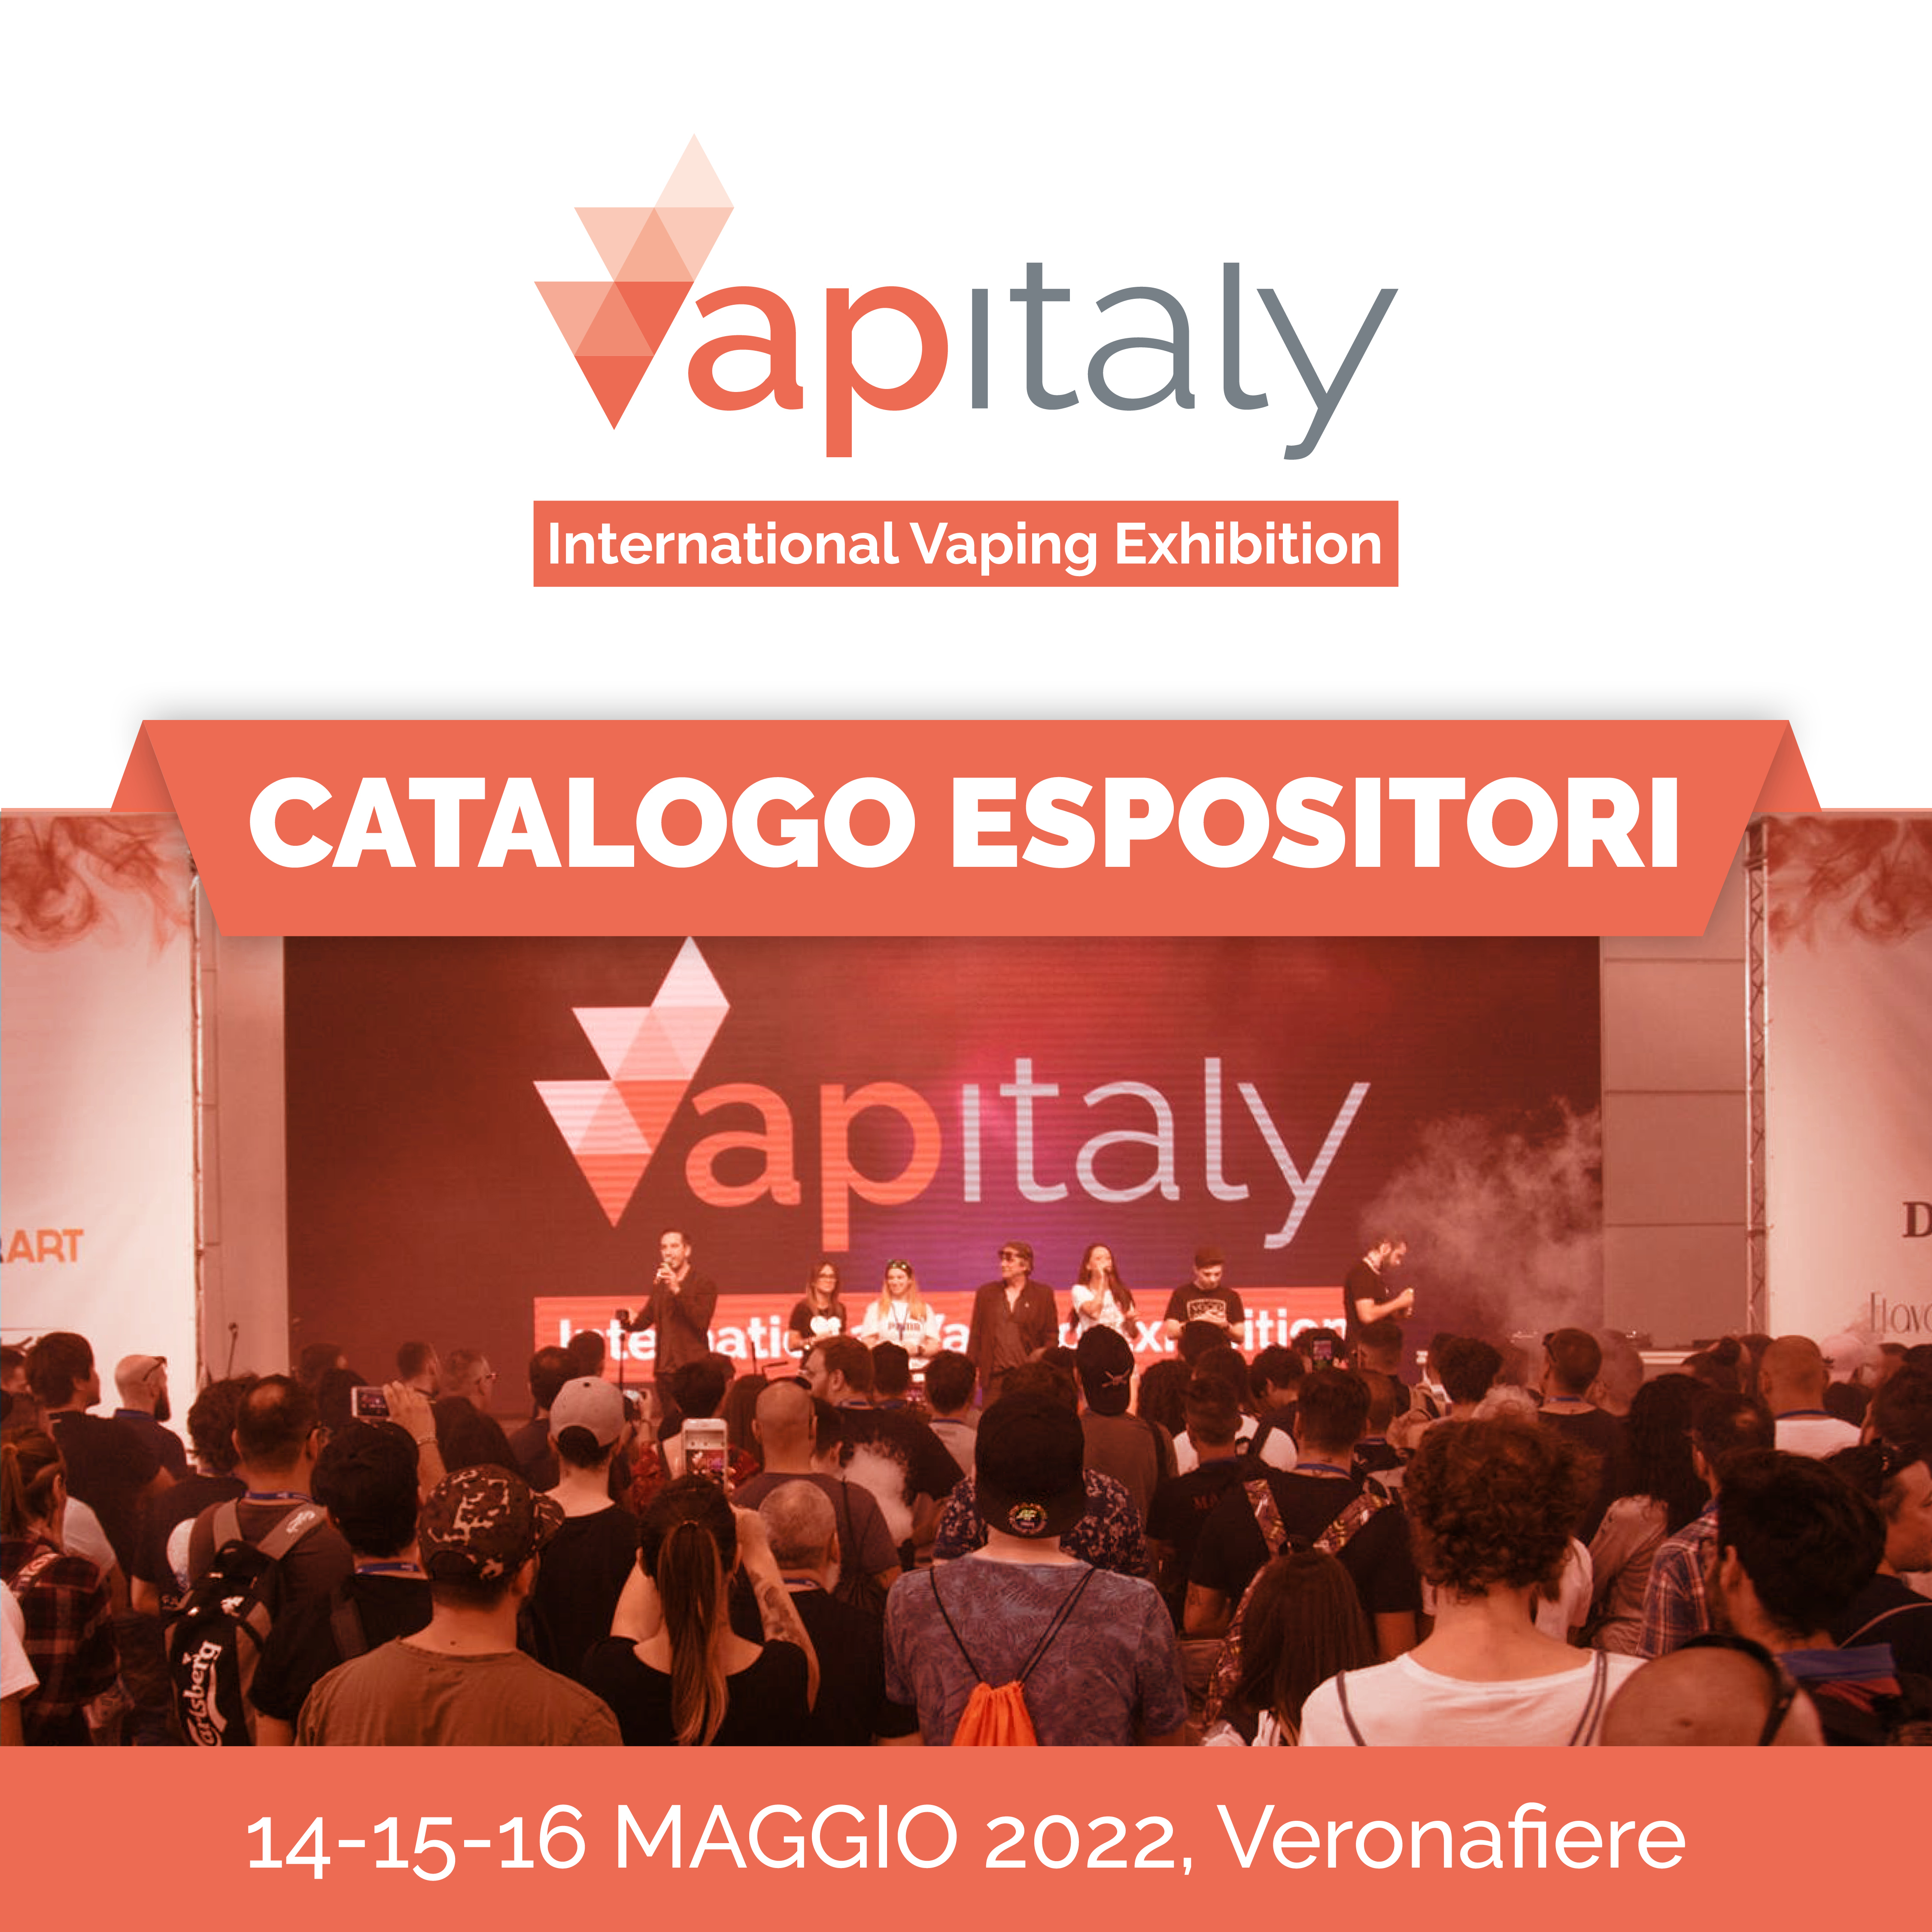 Vapitaly 2022: the Exhibitors Catalogue is now online